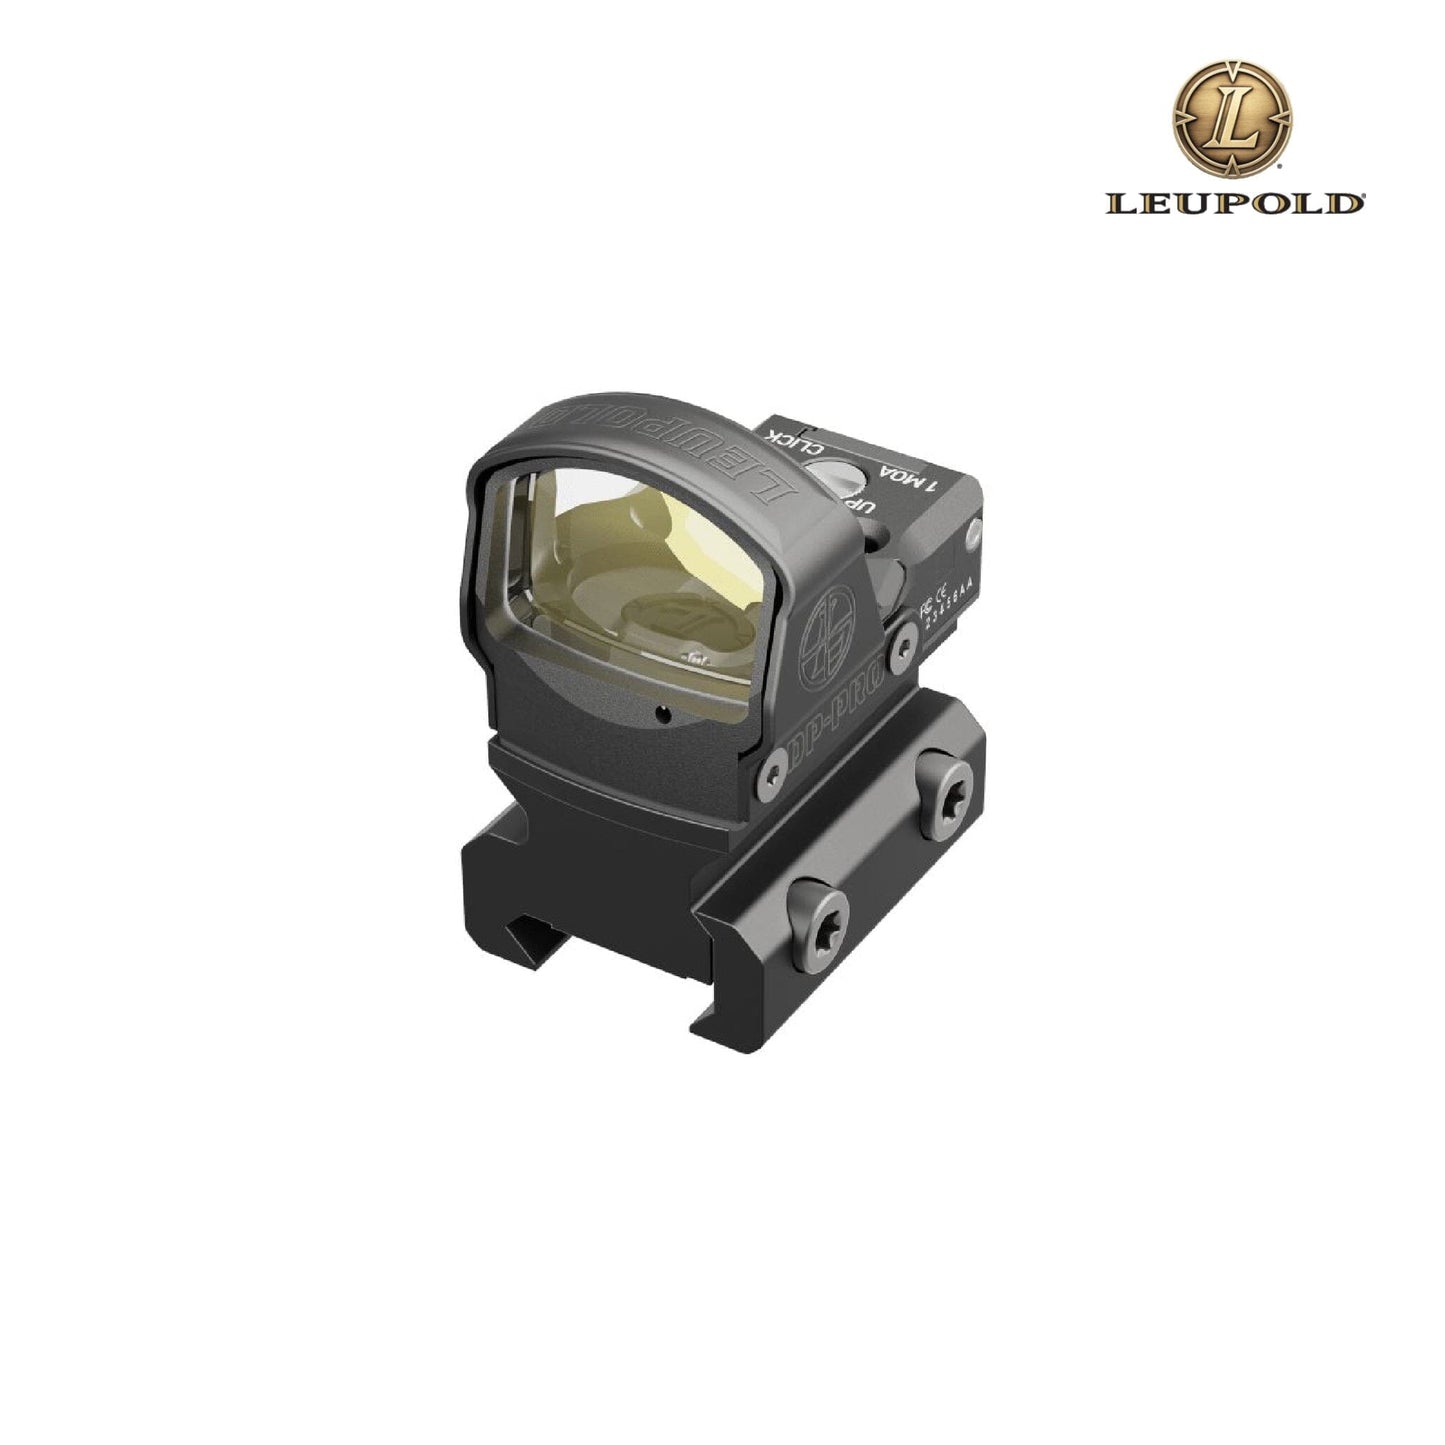 Leupold DeltaPoint PRO Red Dot Sight with AR Mount - 177156 Red Dot Sight Leupold 